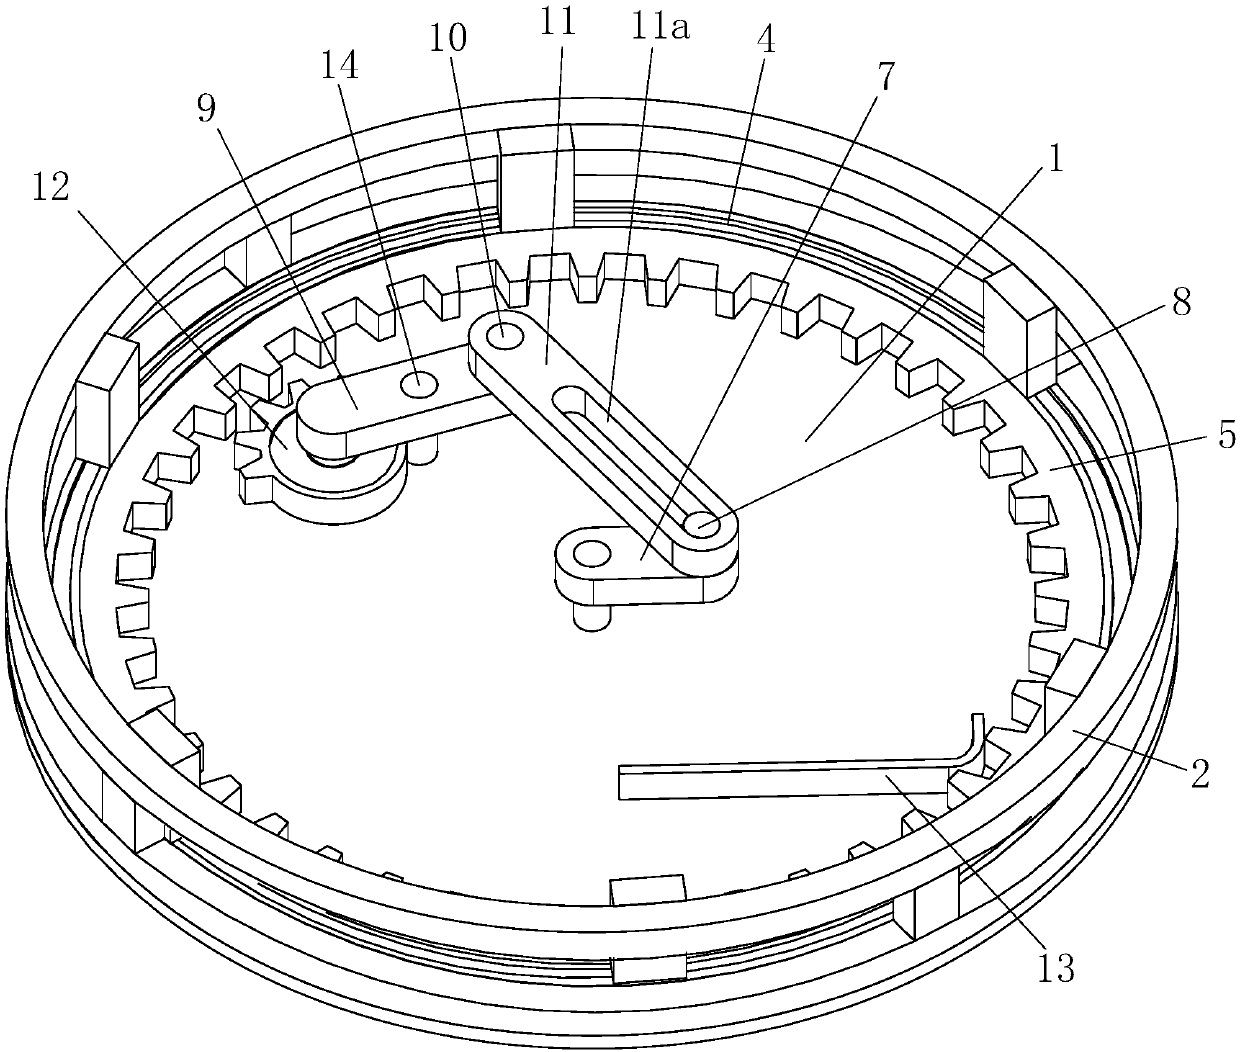 A driving device for grinding brake discs